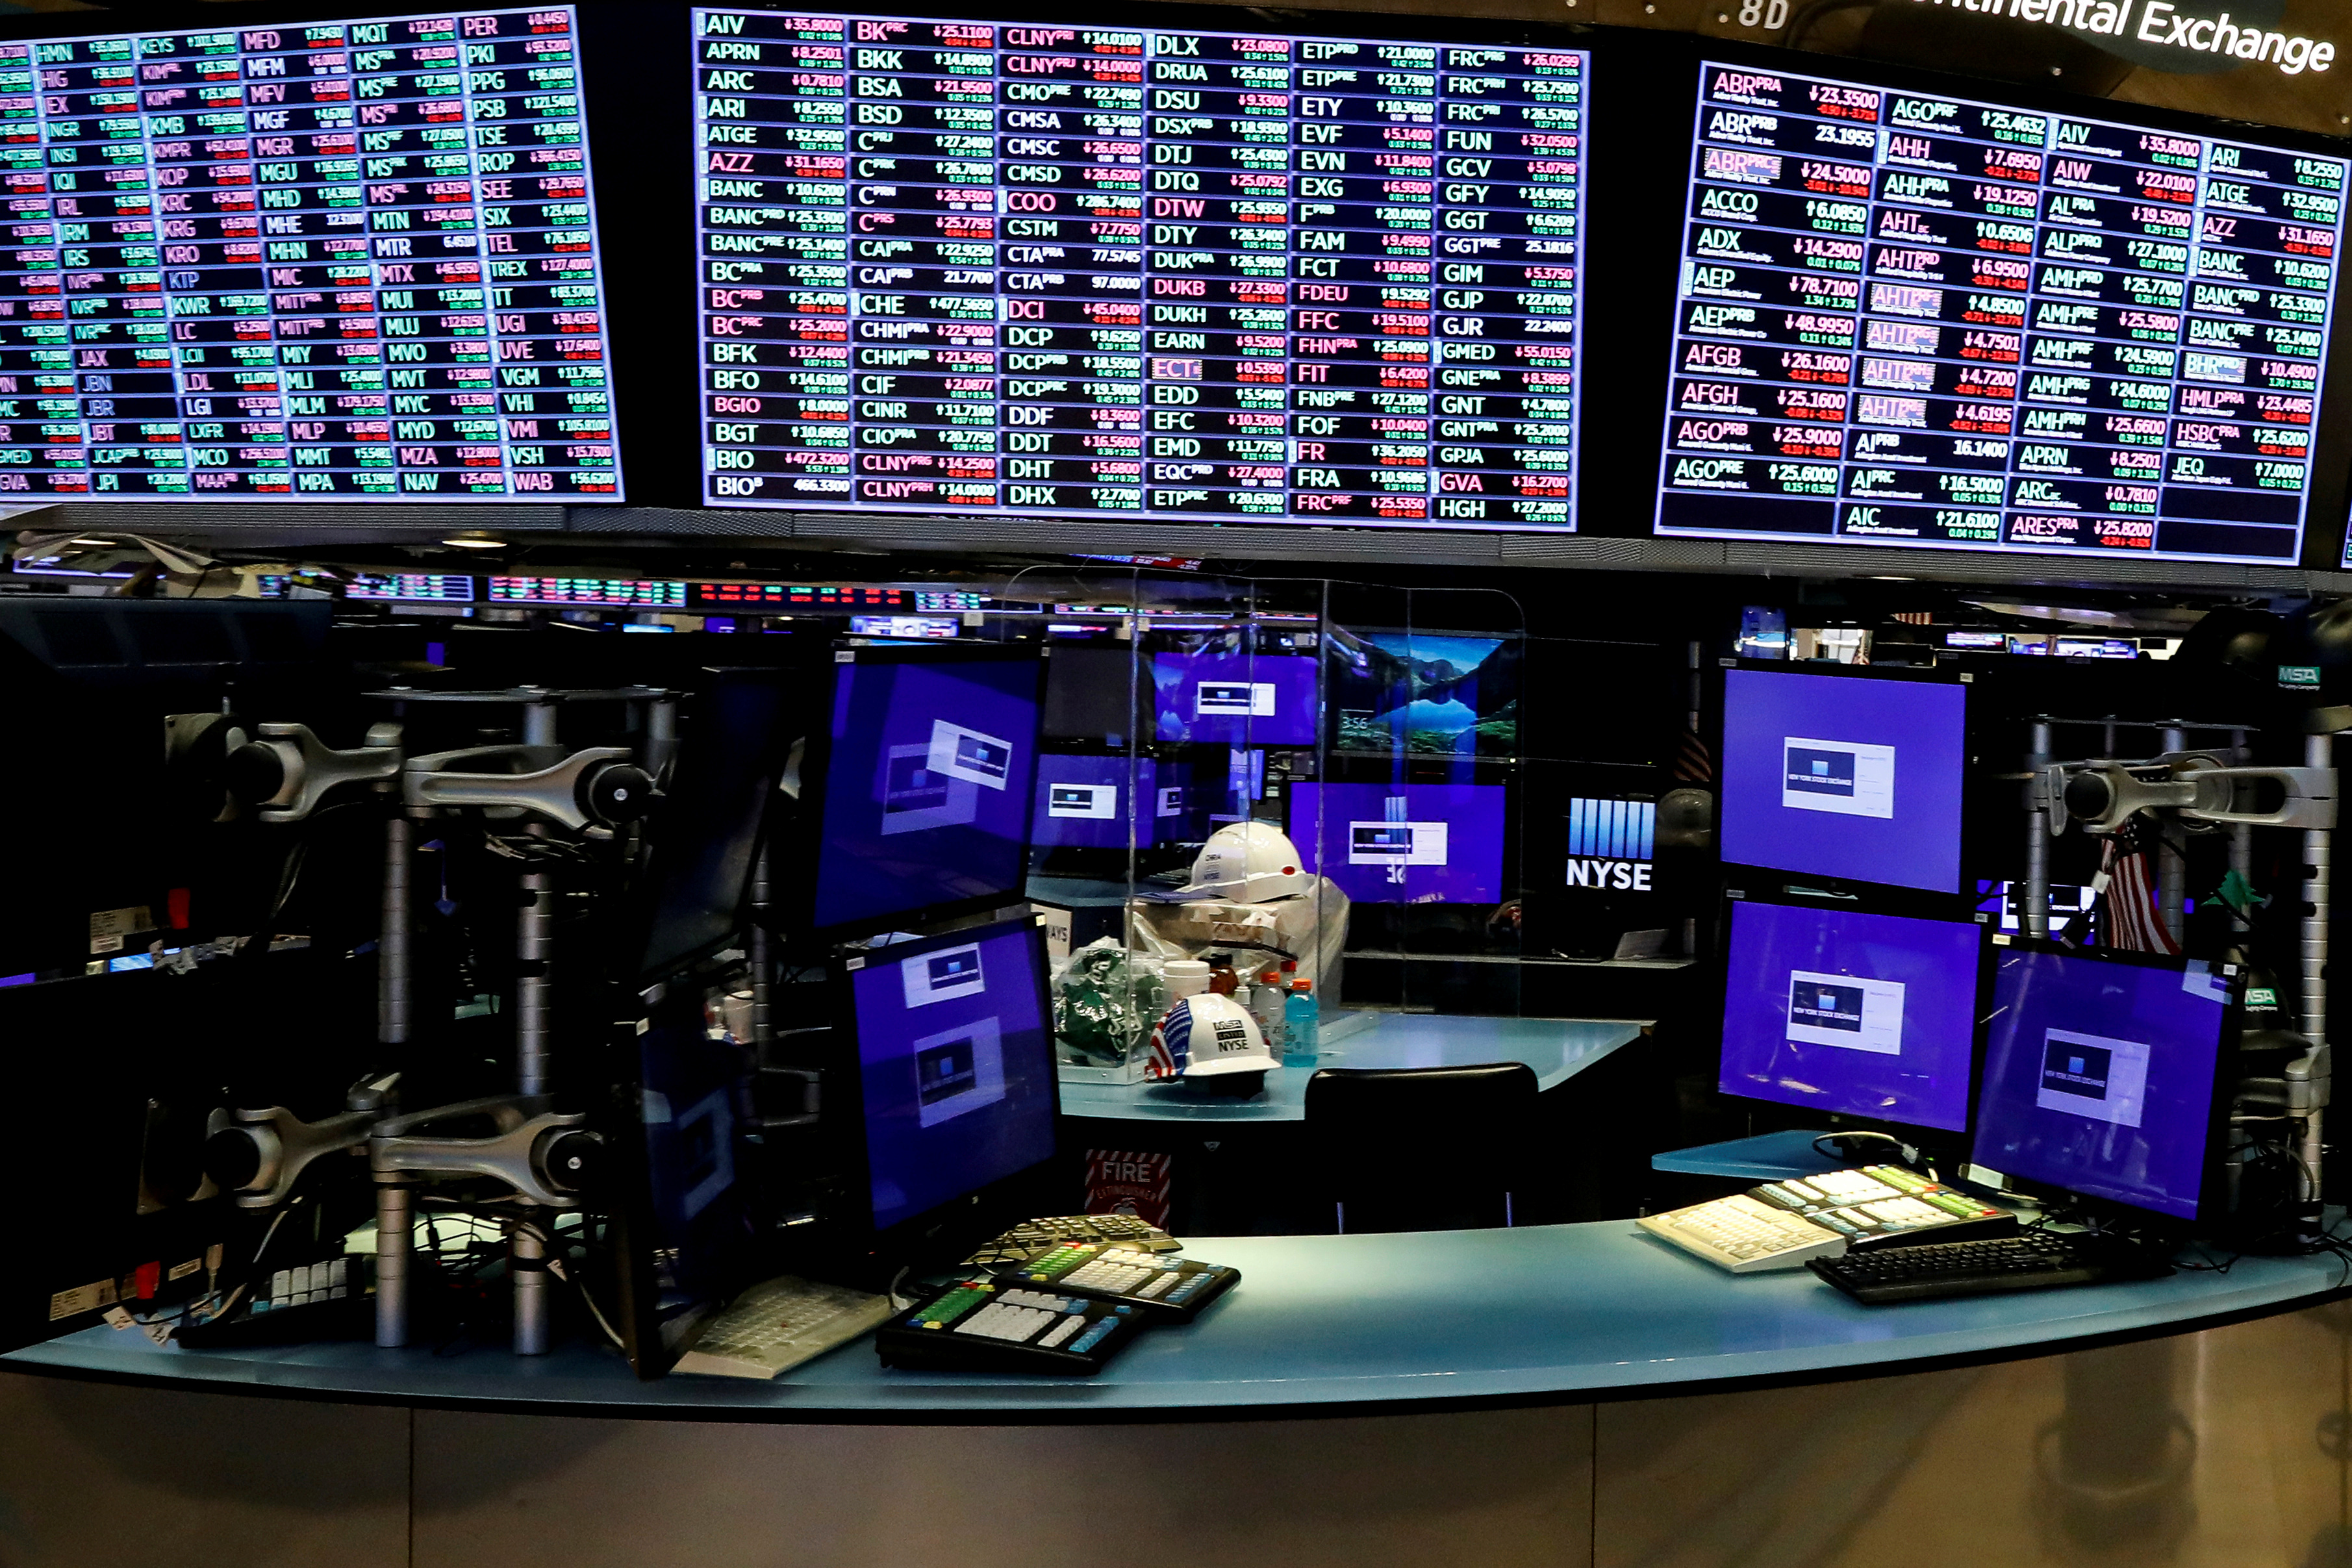 Dividers are seen inside a trading post on the trading floor as preparations are made for the return to trading at the NYSE